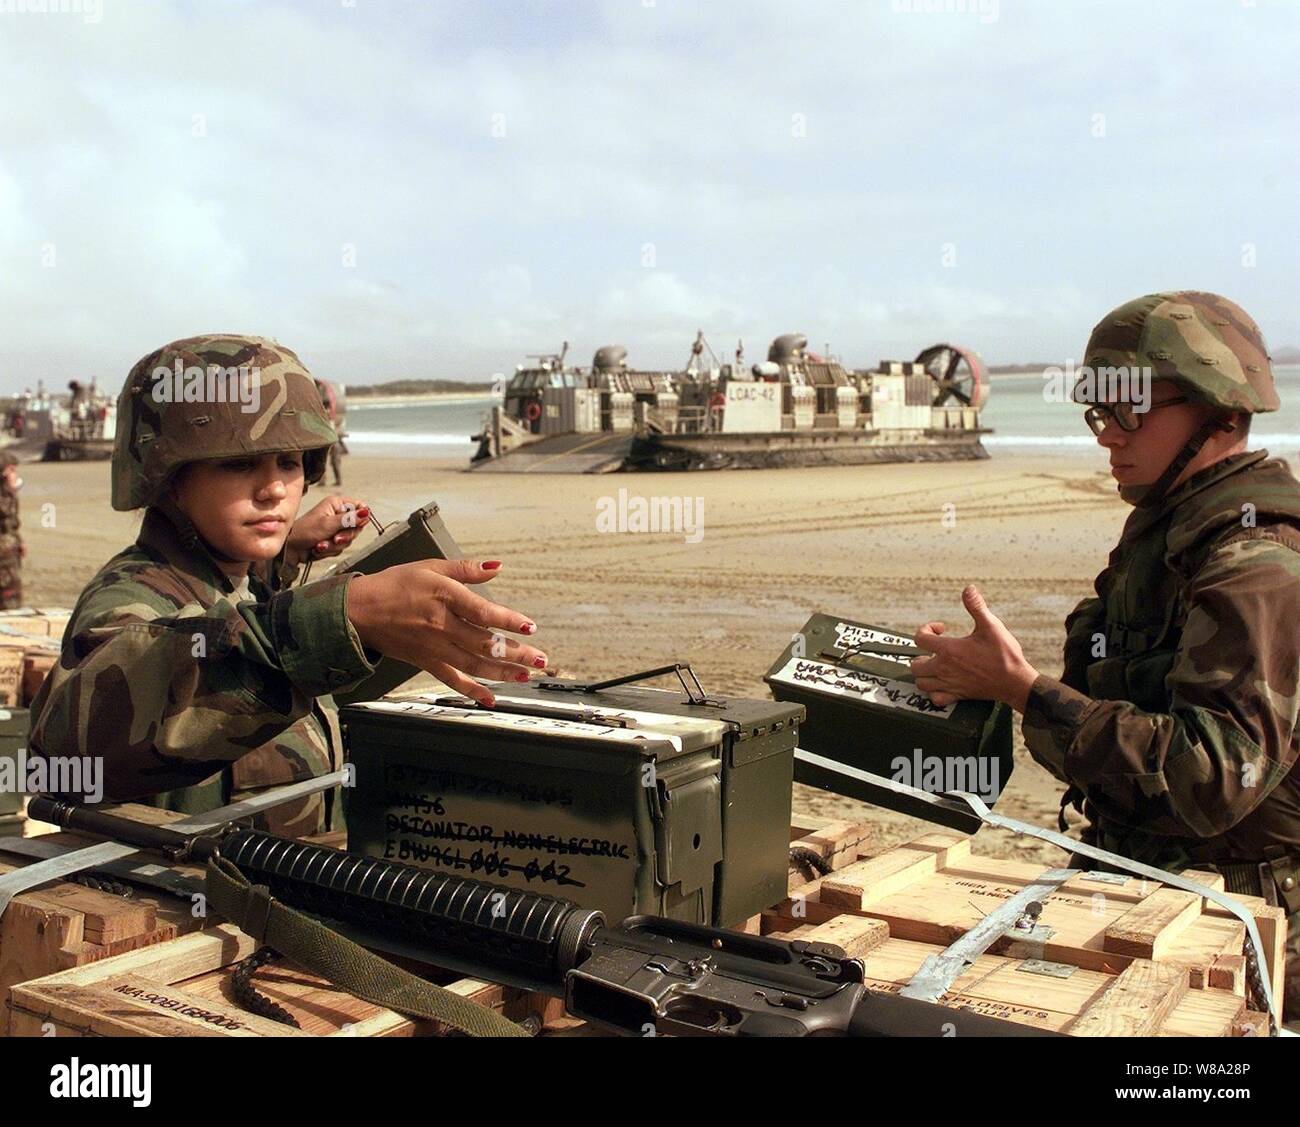 U.S. Marine Pfc. Reuschel Ortiz (left) directs the redistribution of ammunition at Freshwater Beach, Australia, during amphibious assault landing operations of Exercise Crocodile '99 on Oct. 1, 1999.  Exercise Crocodile '99 is a combined U.S. and Australian military training exercise being conducted at the Shoalwater Bay Training Area in Queensland, Australia. Stock Photo